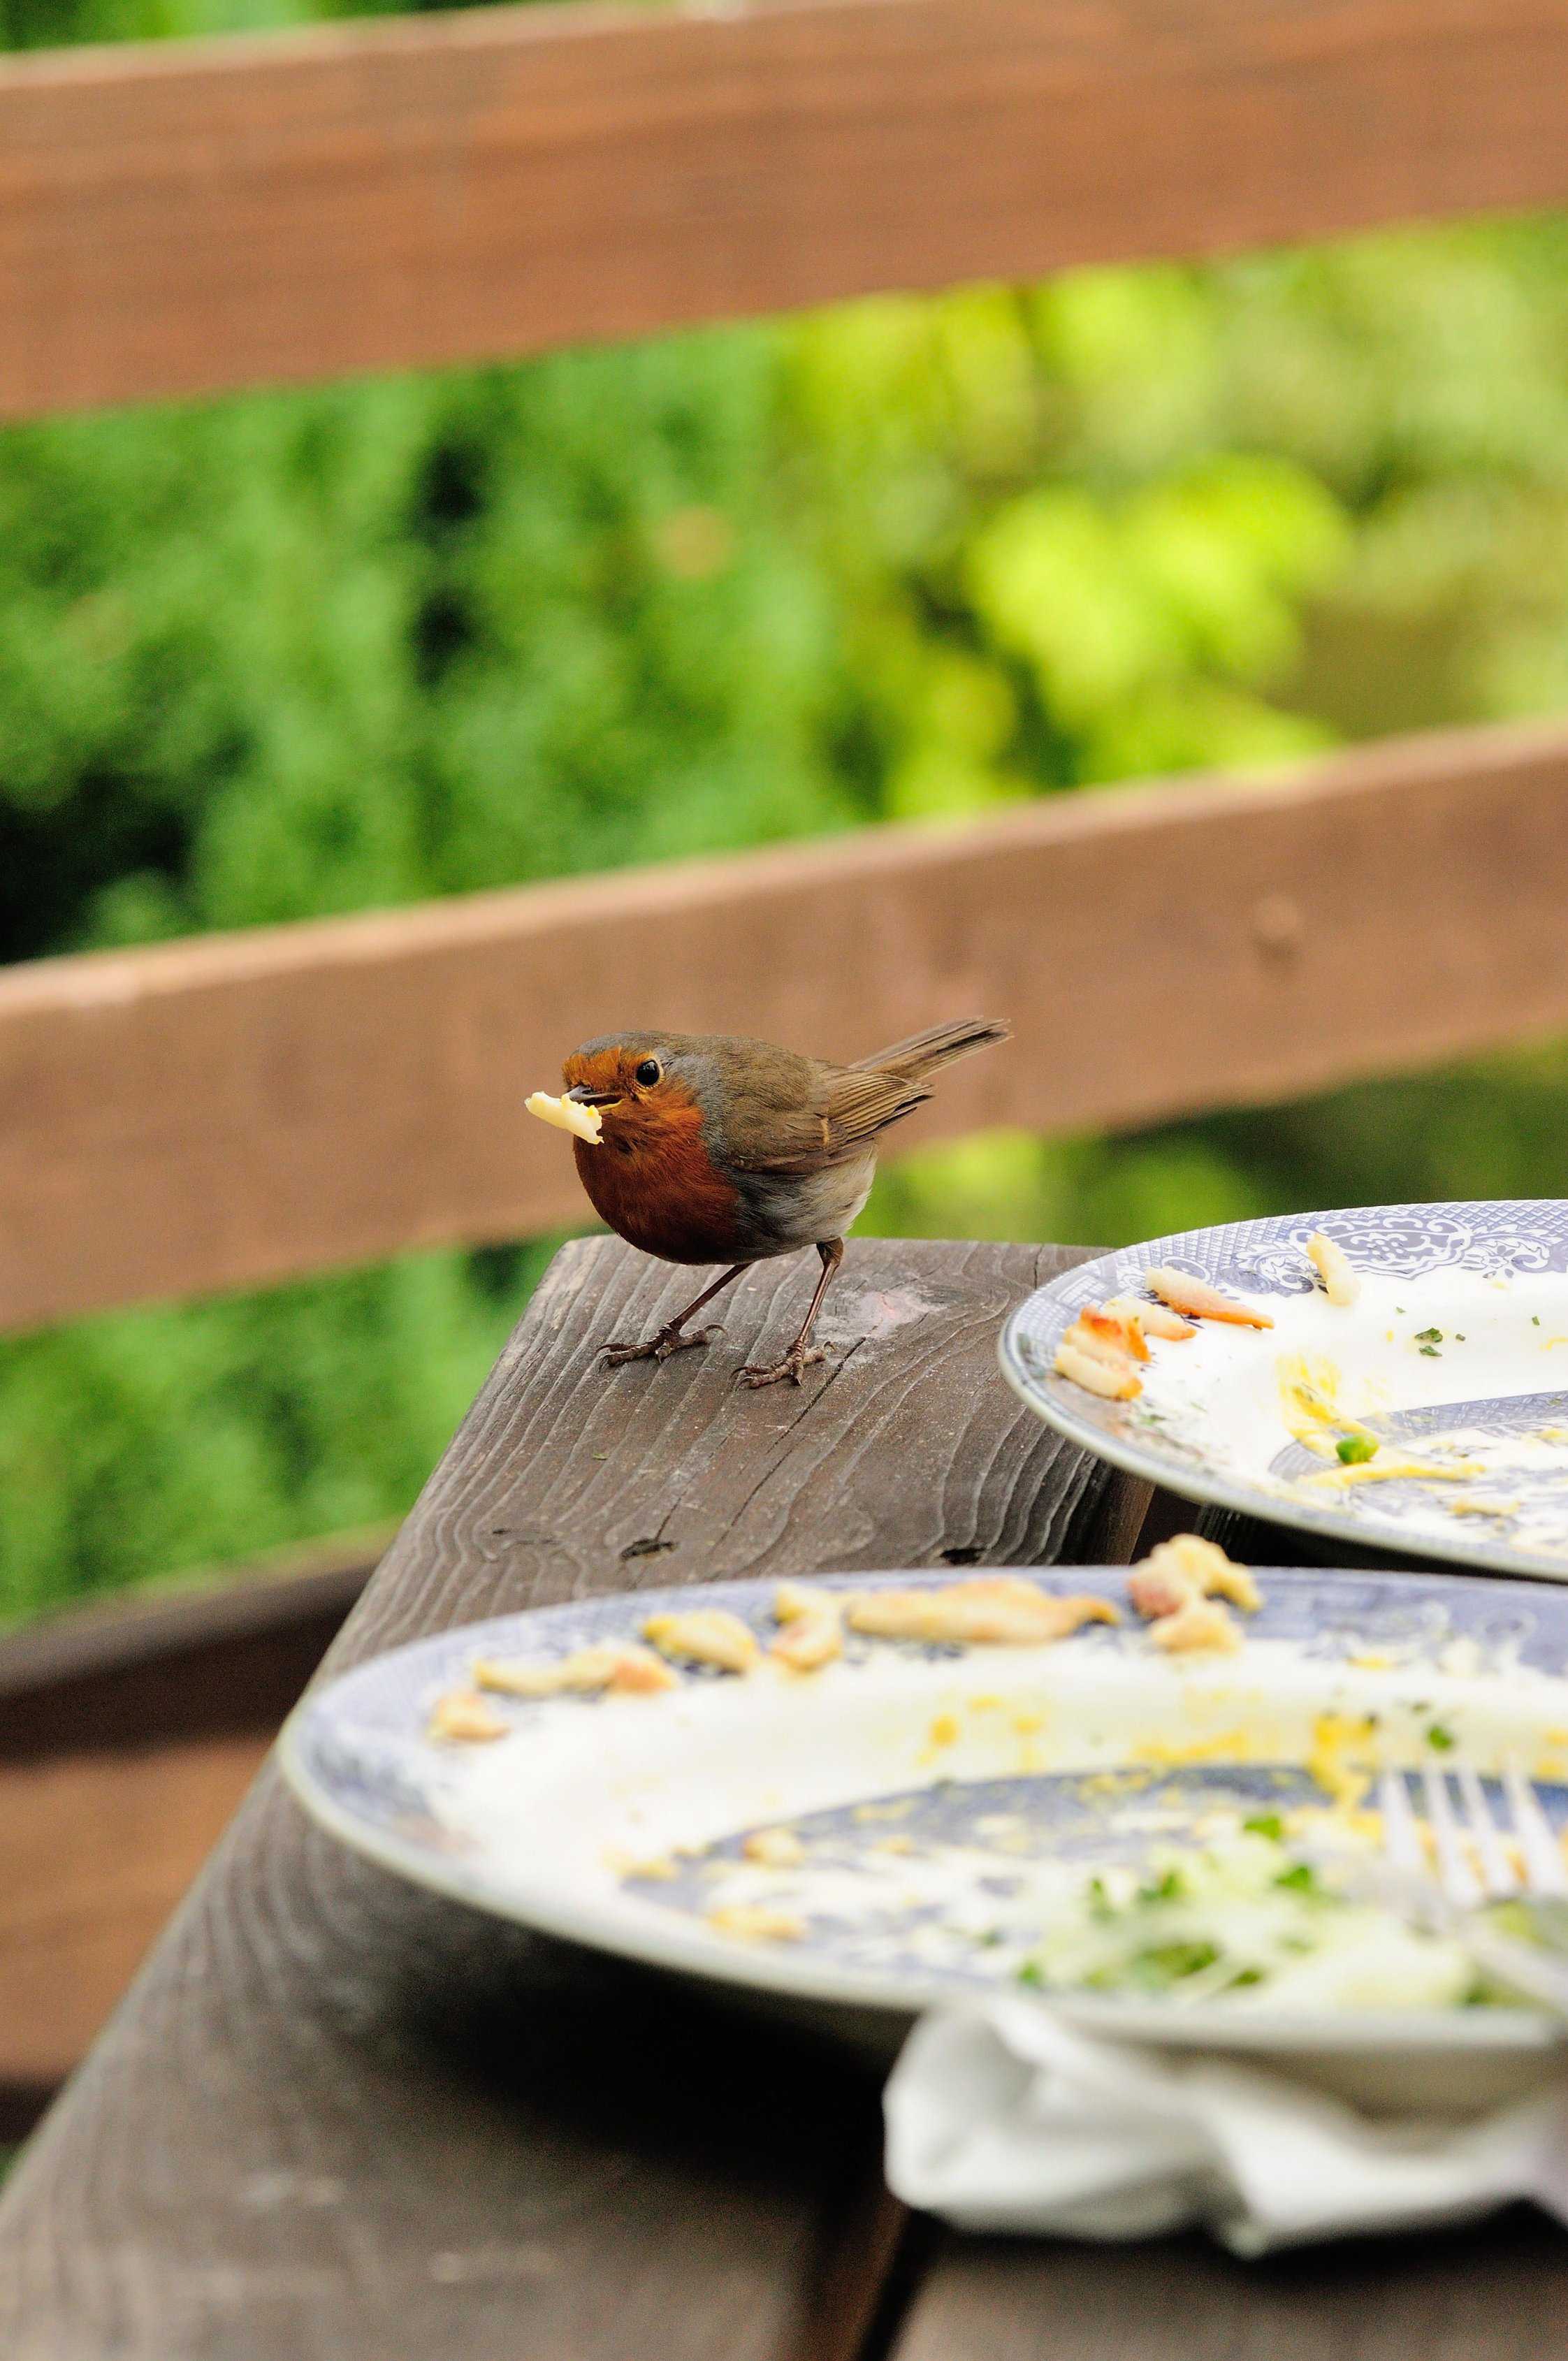 A robin snacking on crumbs